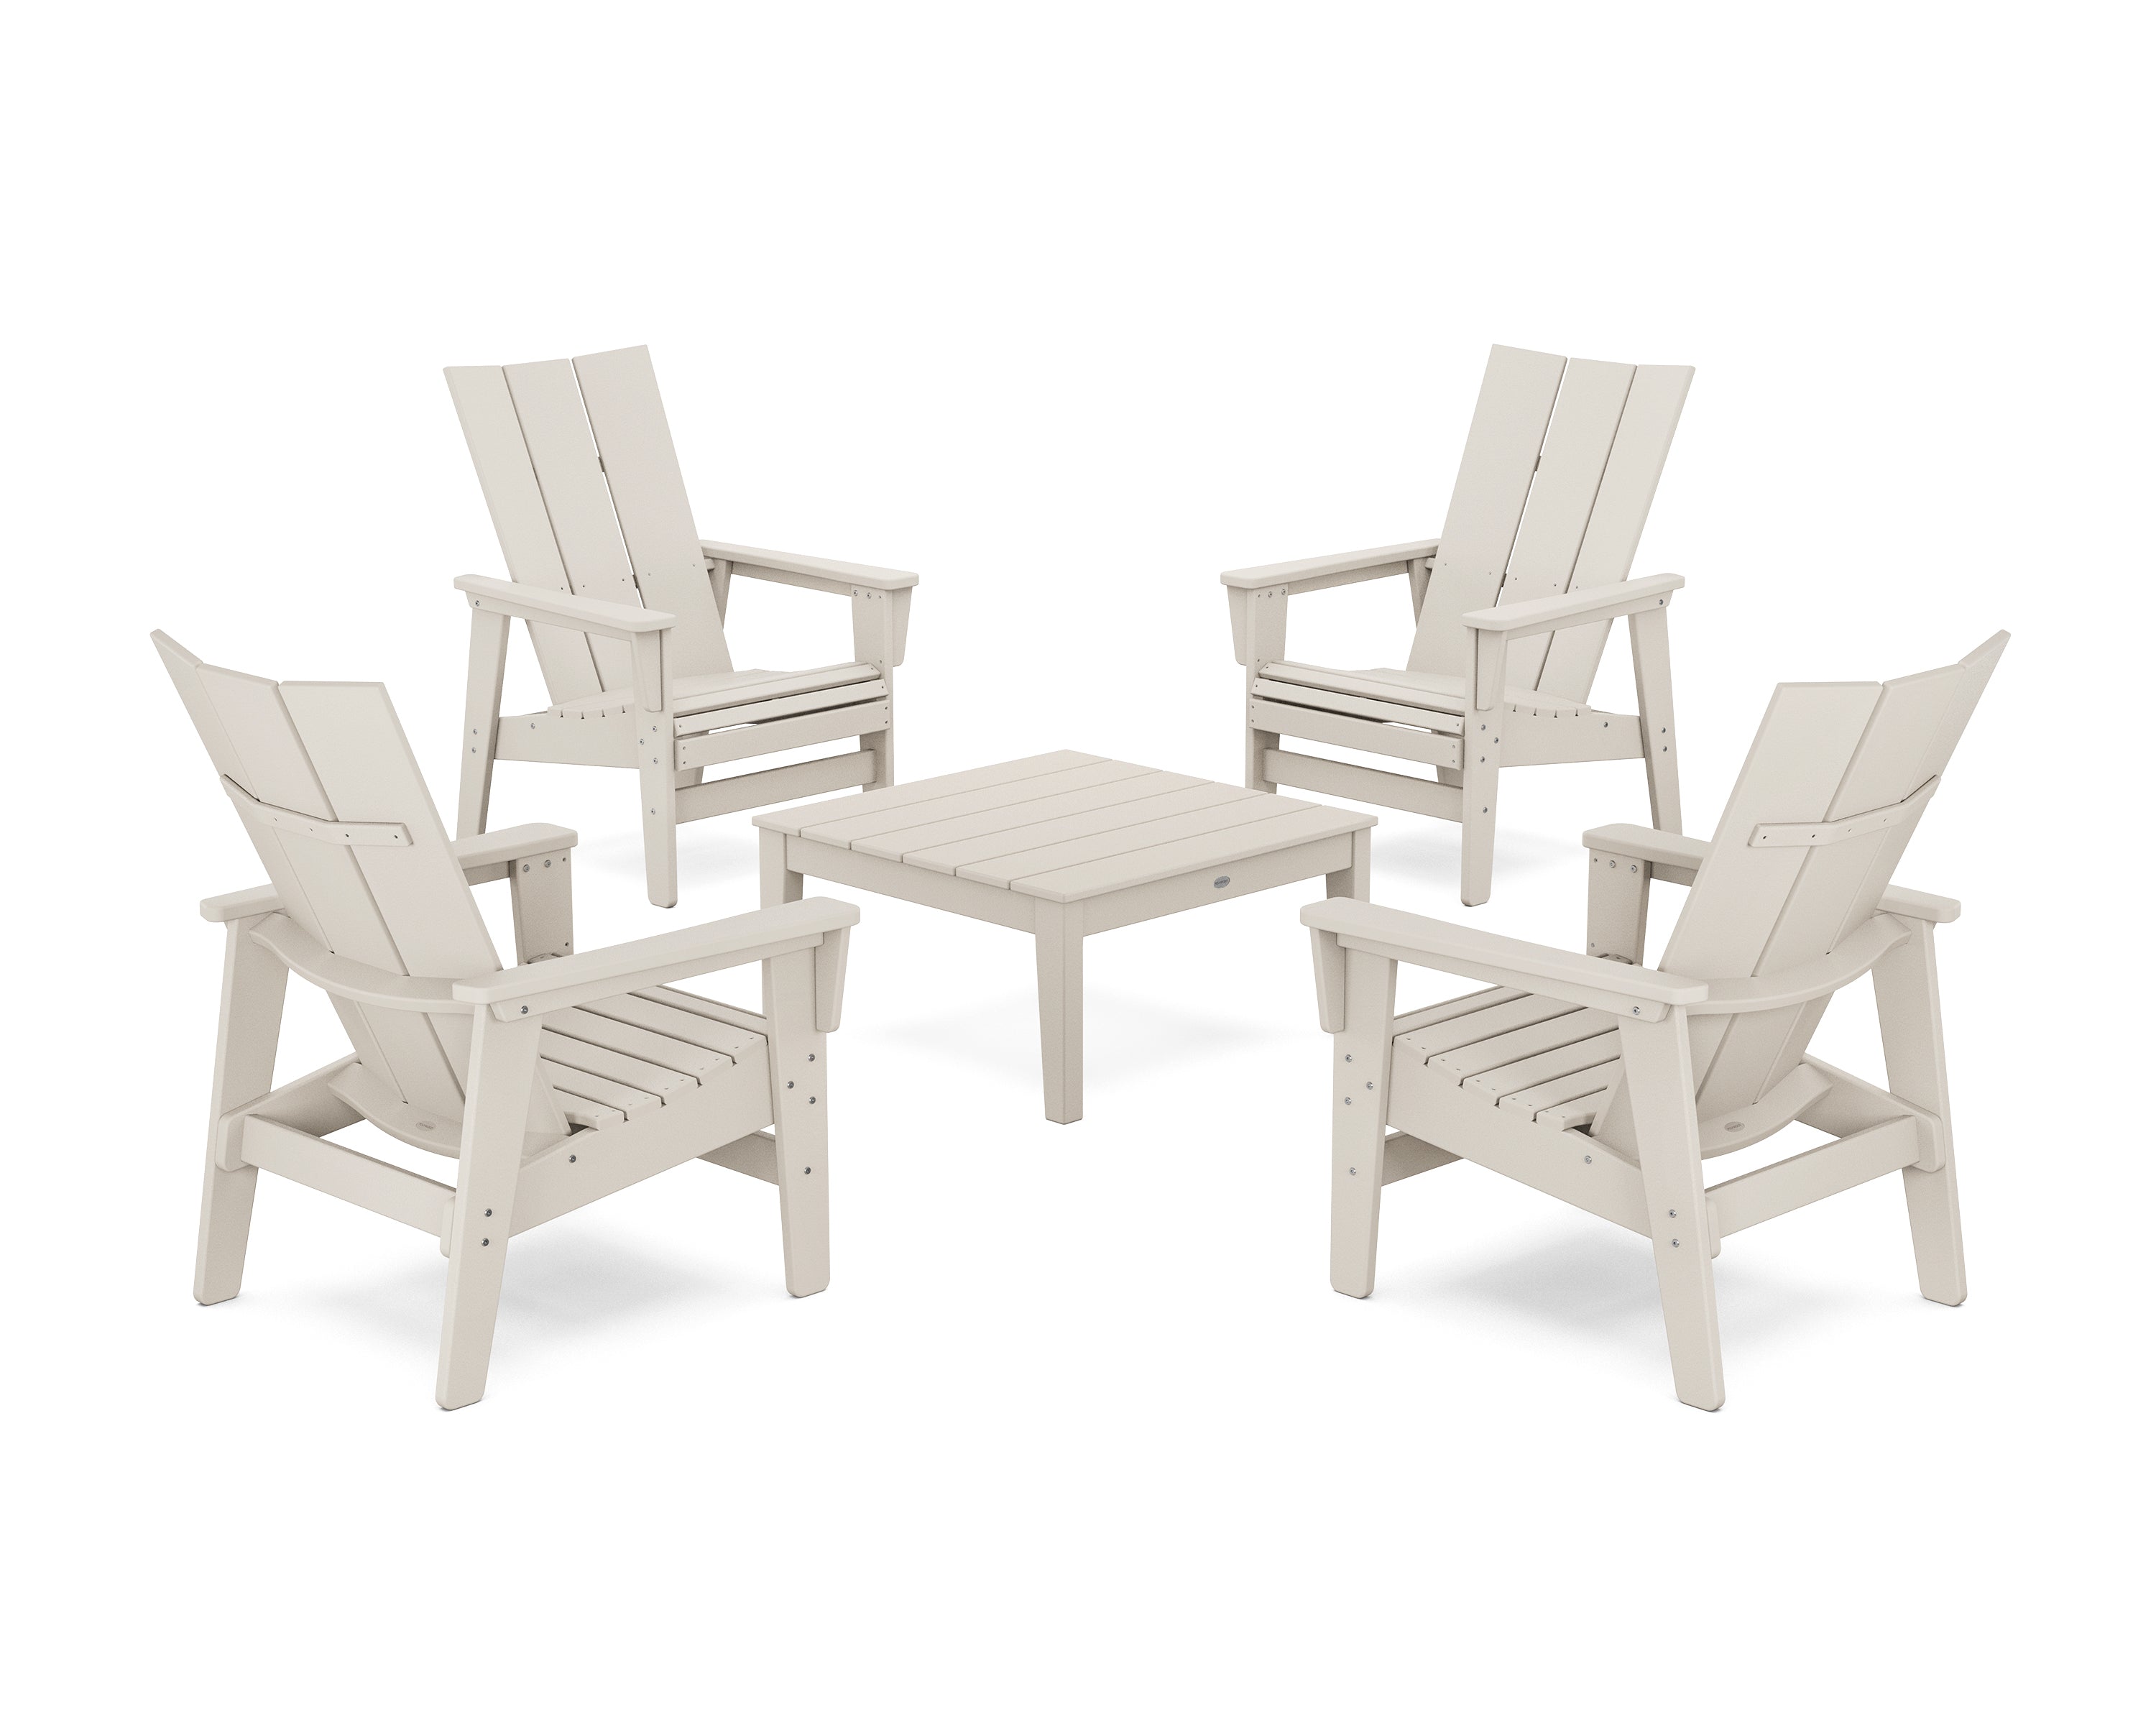 POLYWOOD® 5-Piece Modern Grand Upright Adirondack Chair Conversation Group in Sand